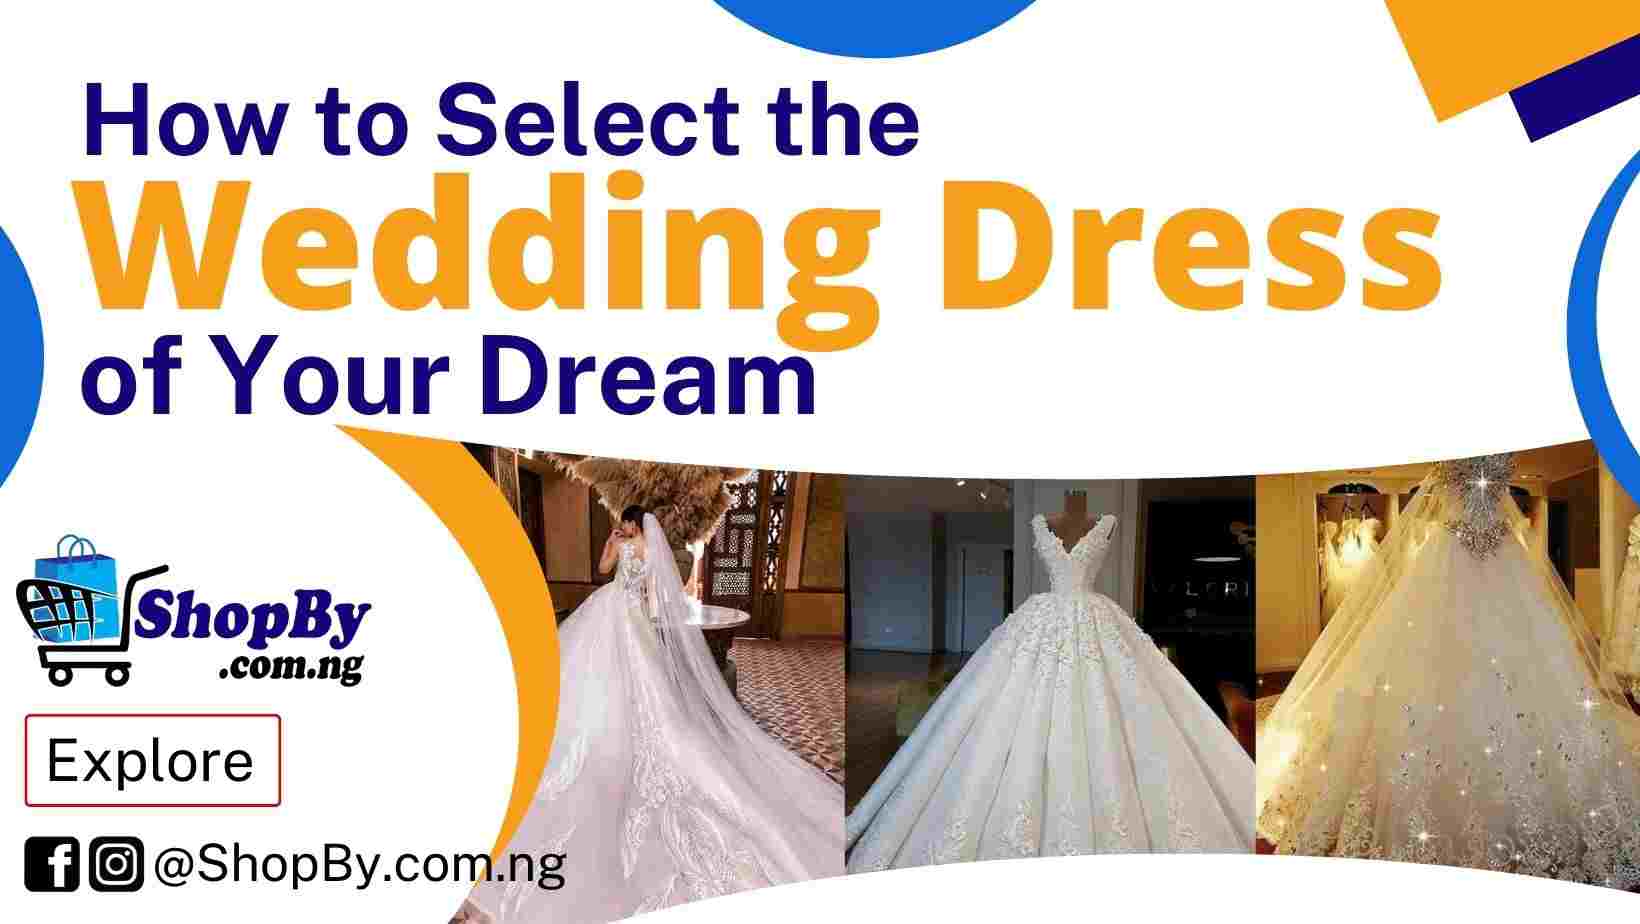 How to Select the Wedding Dress of Your Dream